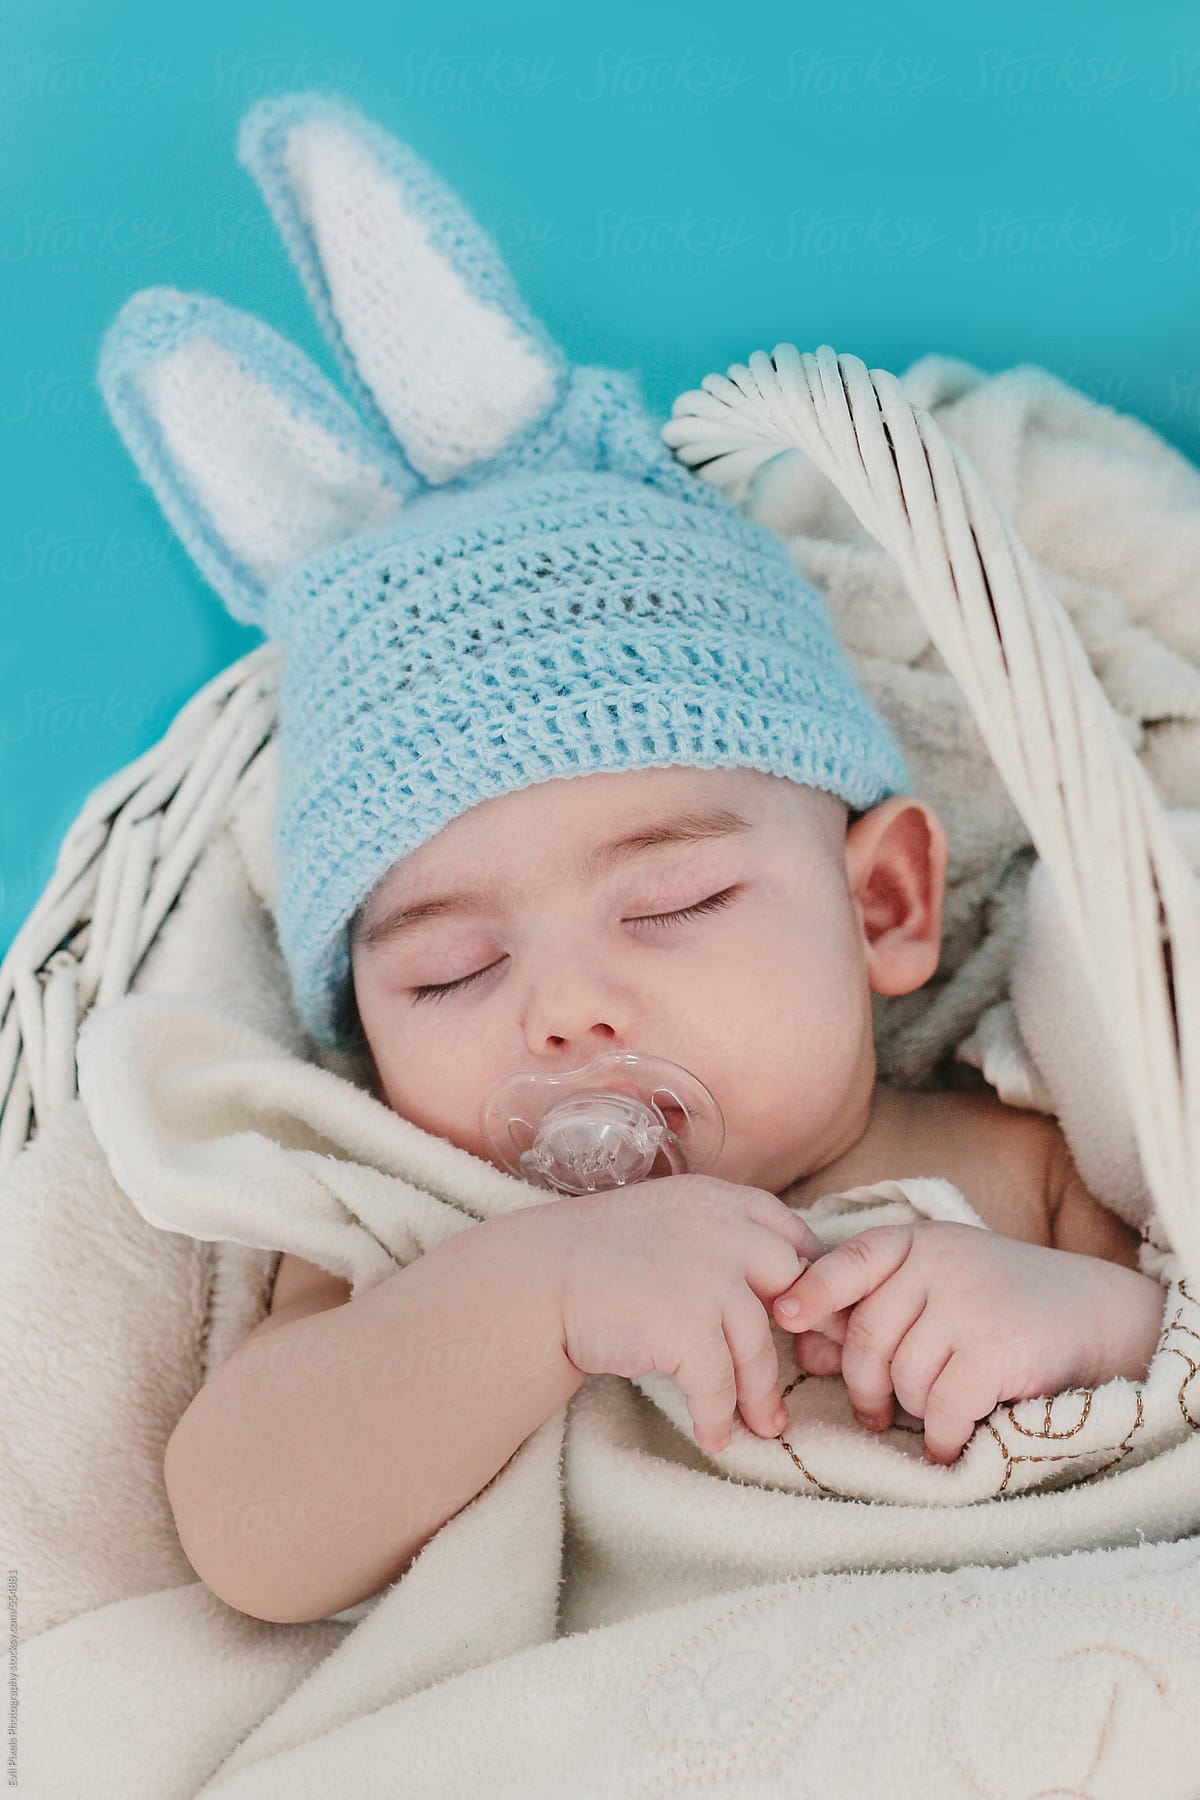 Cute baby with i interesting bunny cap